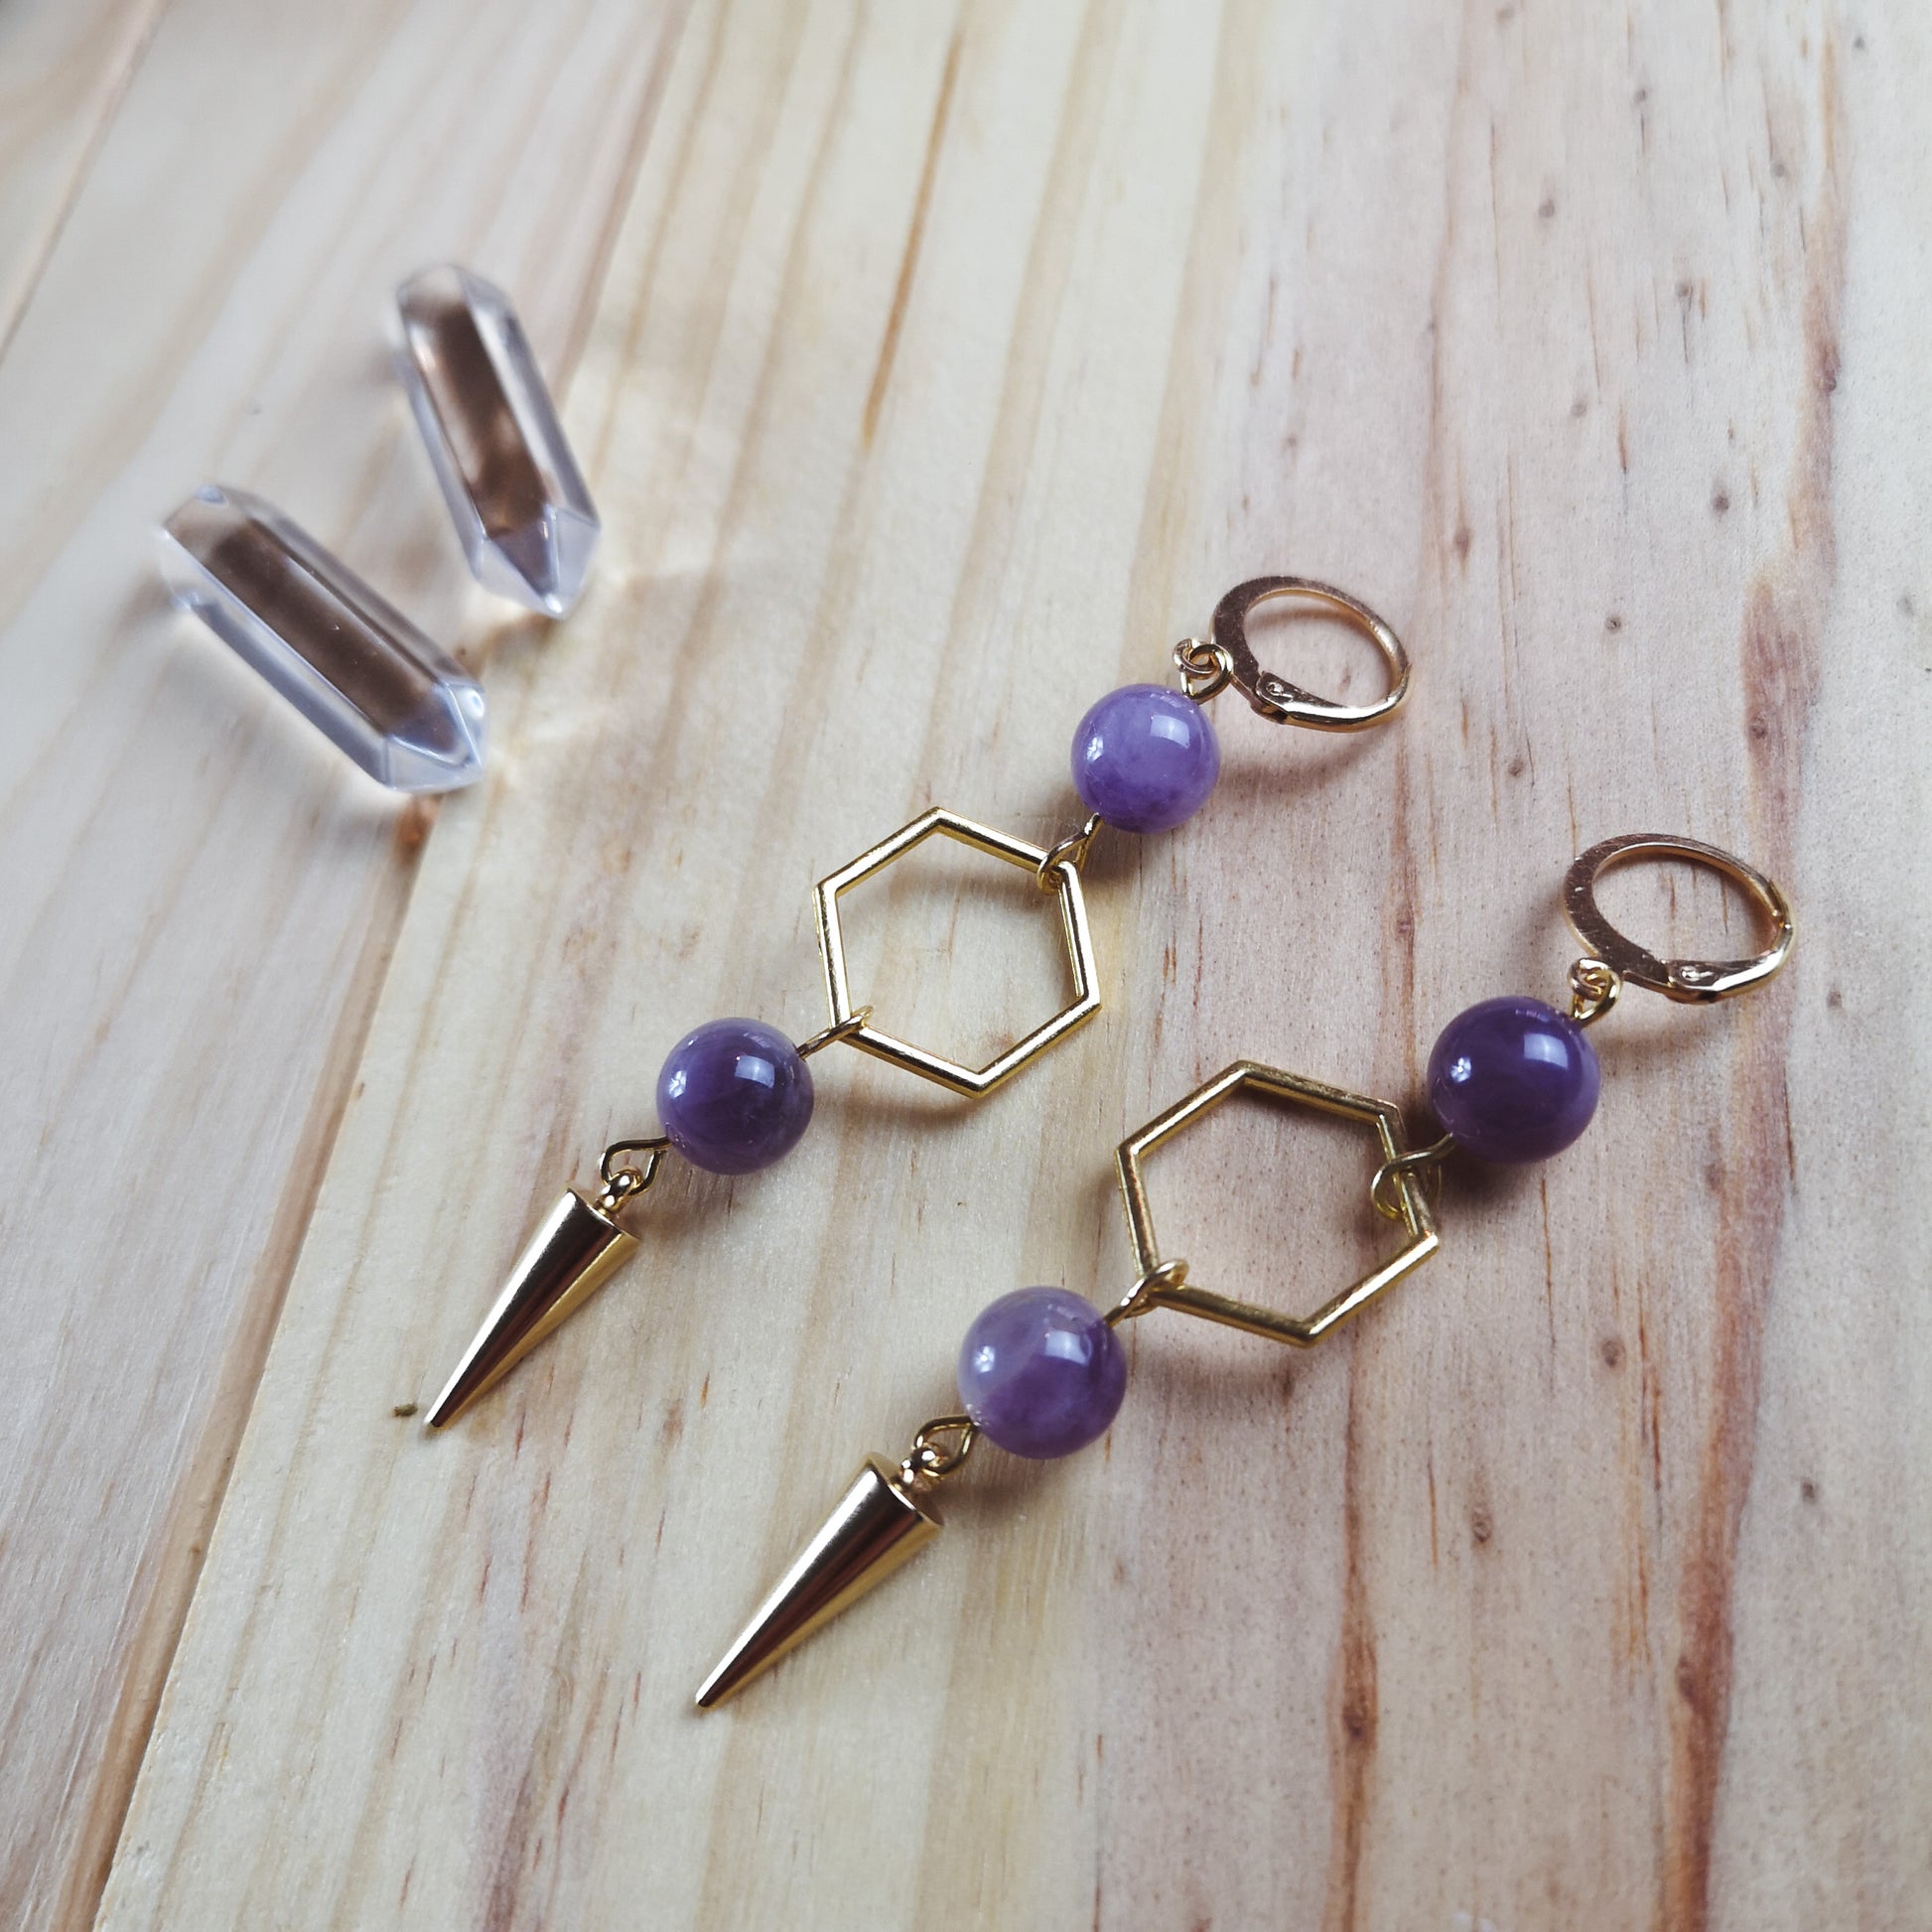 Geometric minimalist amethyst golden earrings - The French Witch shop